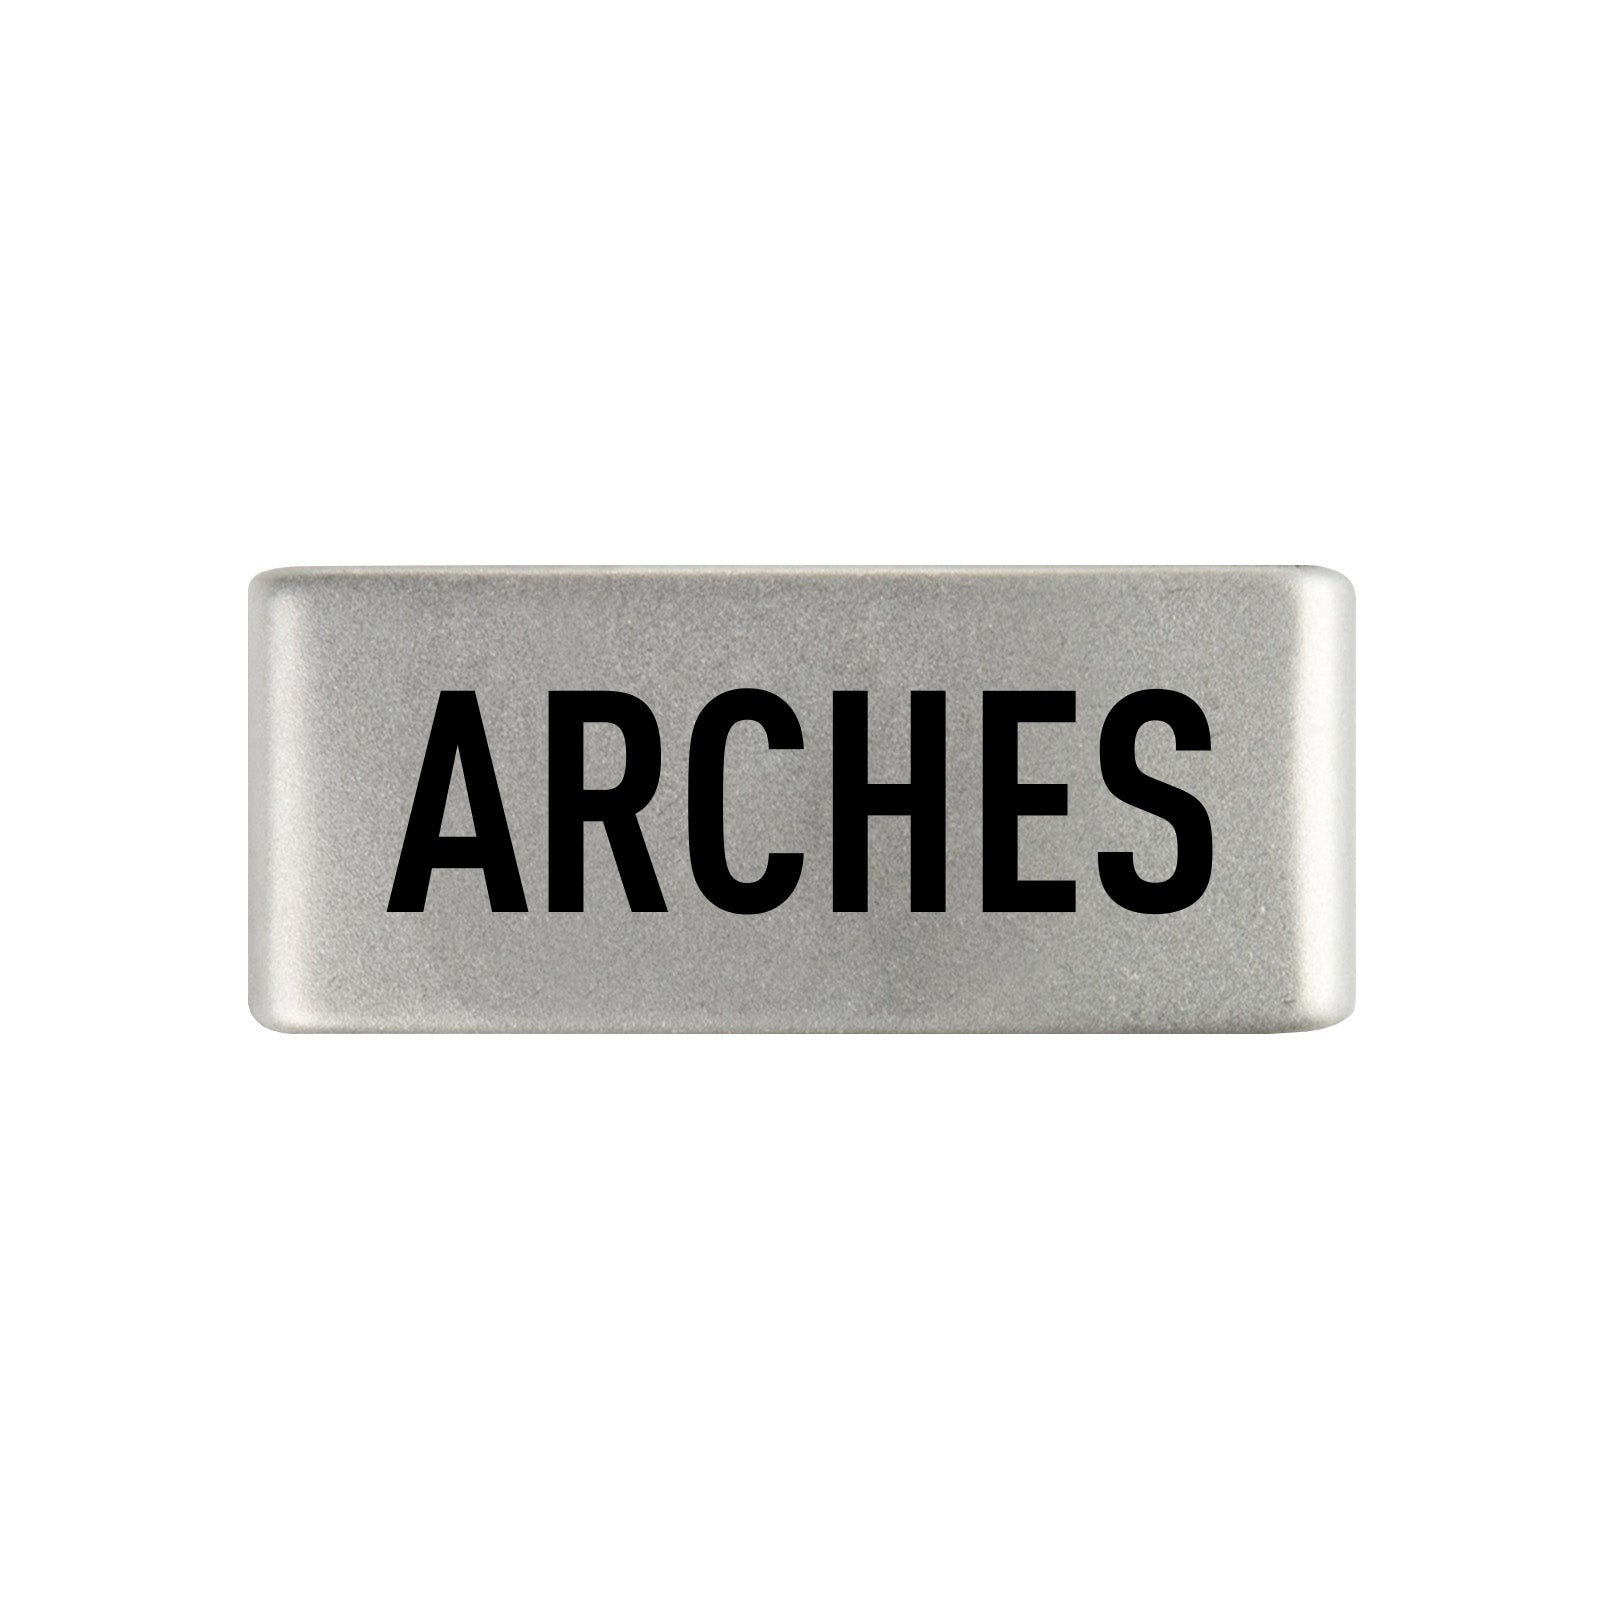 Arches Badge Badge 13mm - ROAD iD